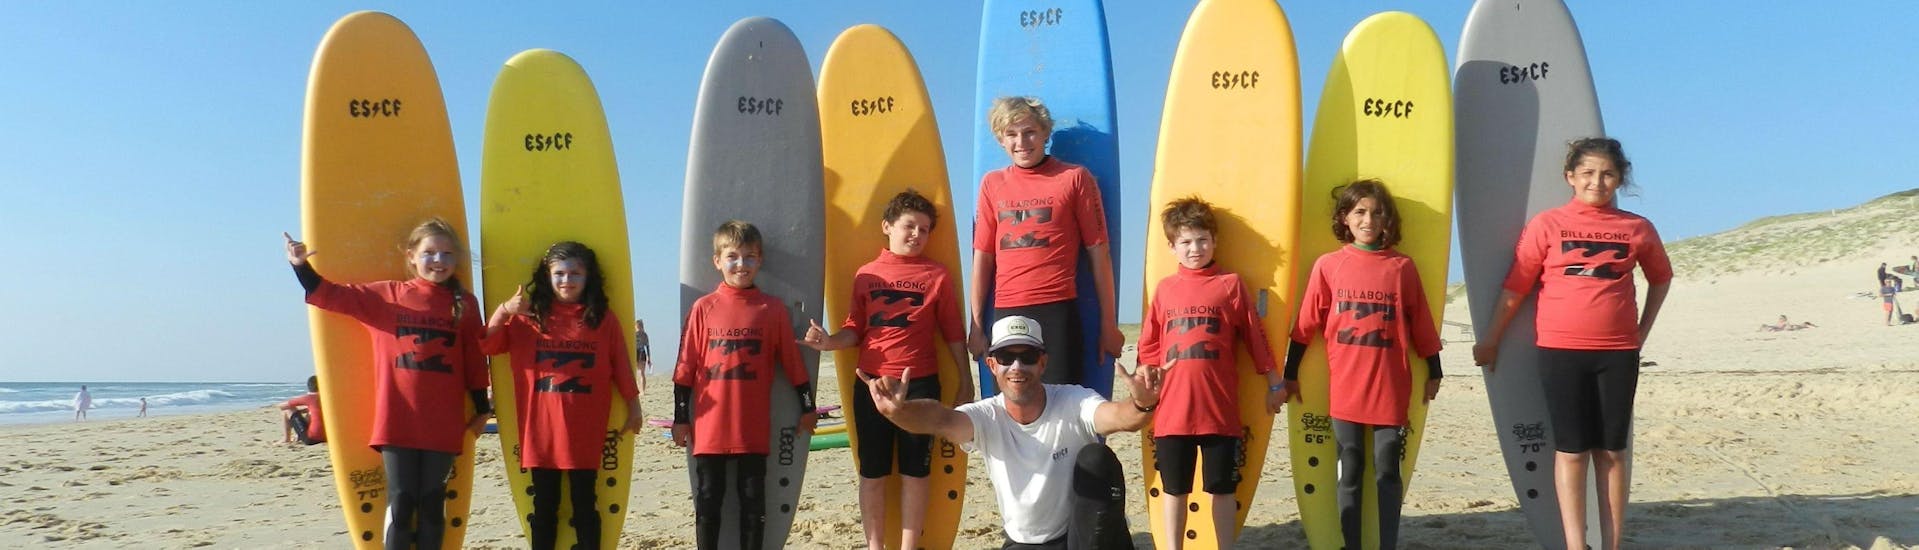 Children are standing next to each other in front of their surboard, their surf instructor from ESCF Vieux Boucau sitting on the sand, at the end of their Private Surfing Lessons on the Sablères Beach.